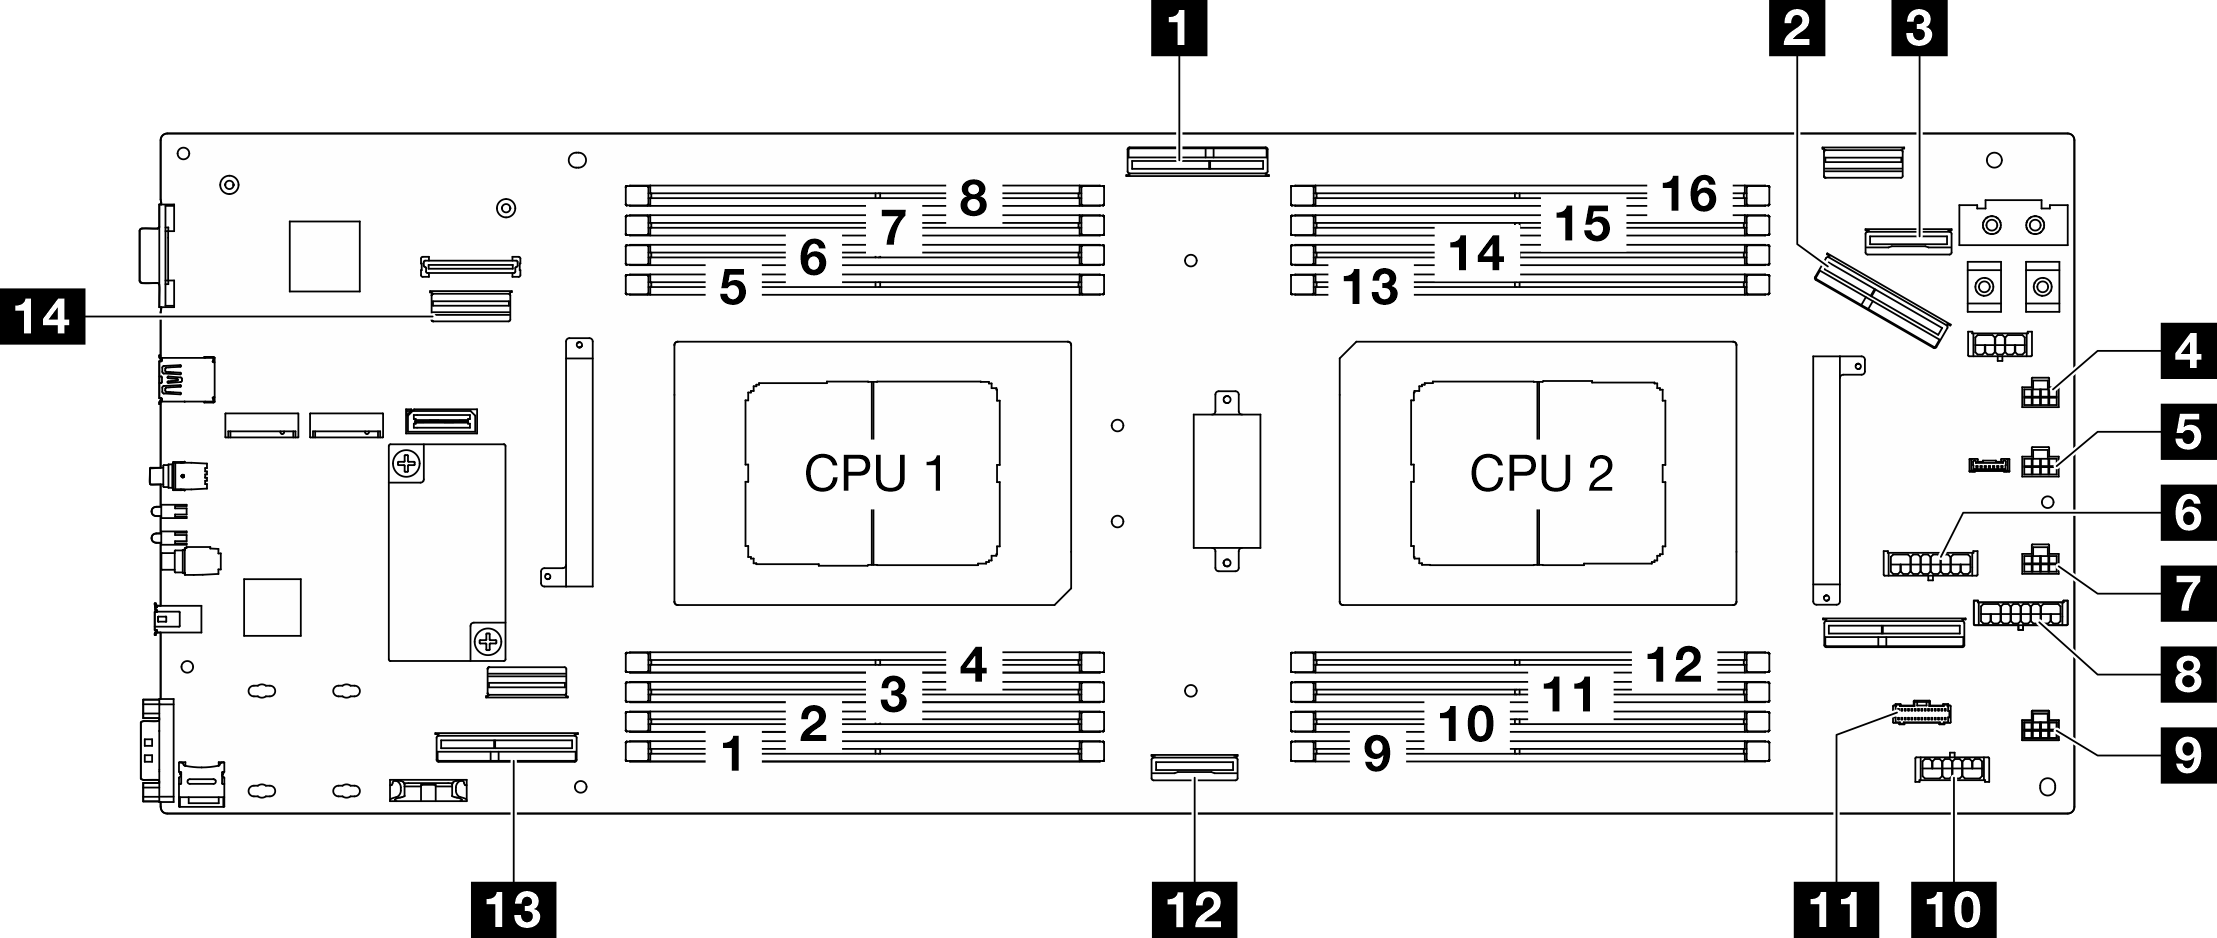 System-board connectors for cable routing